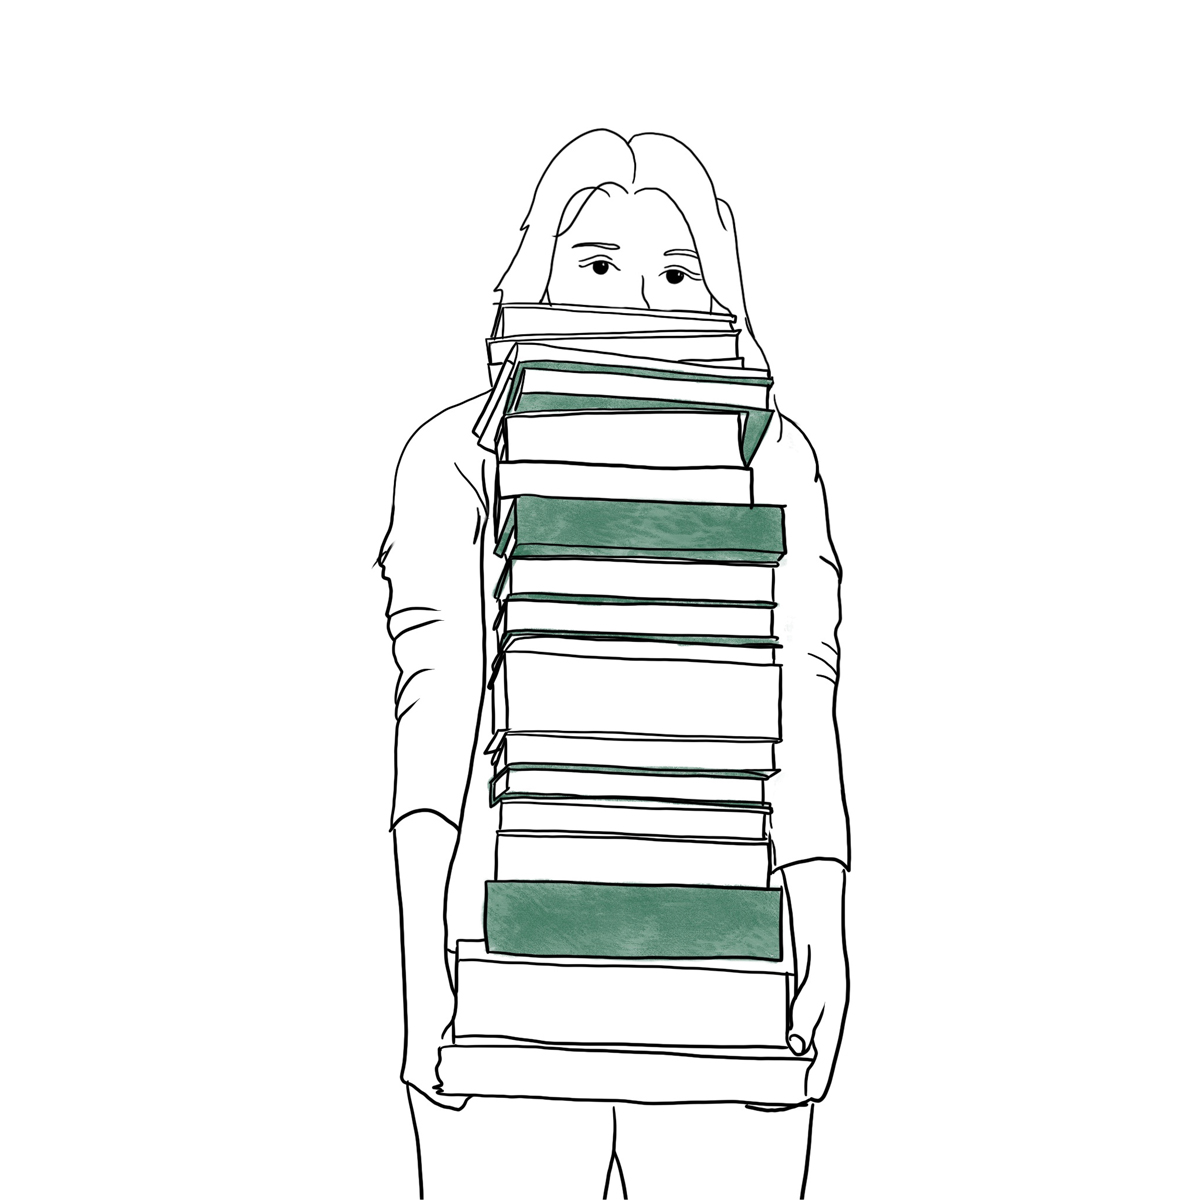 An illustrative sketch of a woman holding books